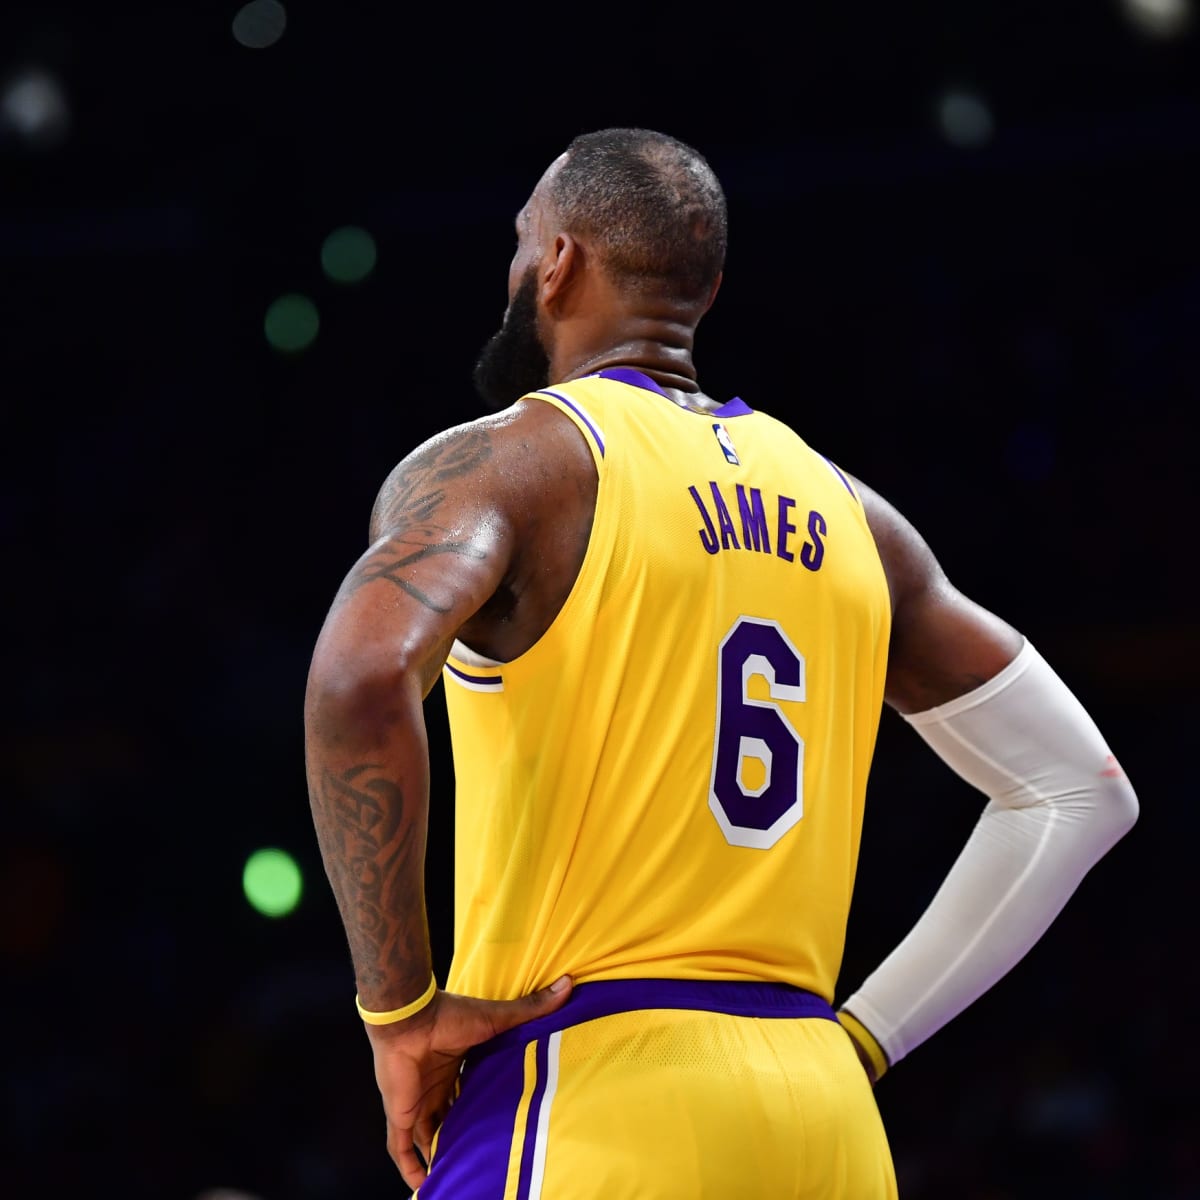 LeBron James considering retirement after Los Angeles Lakers swept by Denver  Nuggets